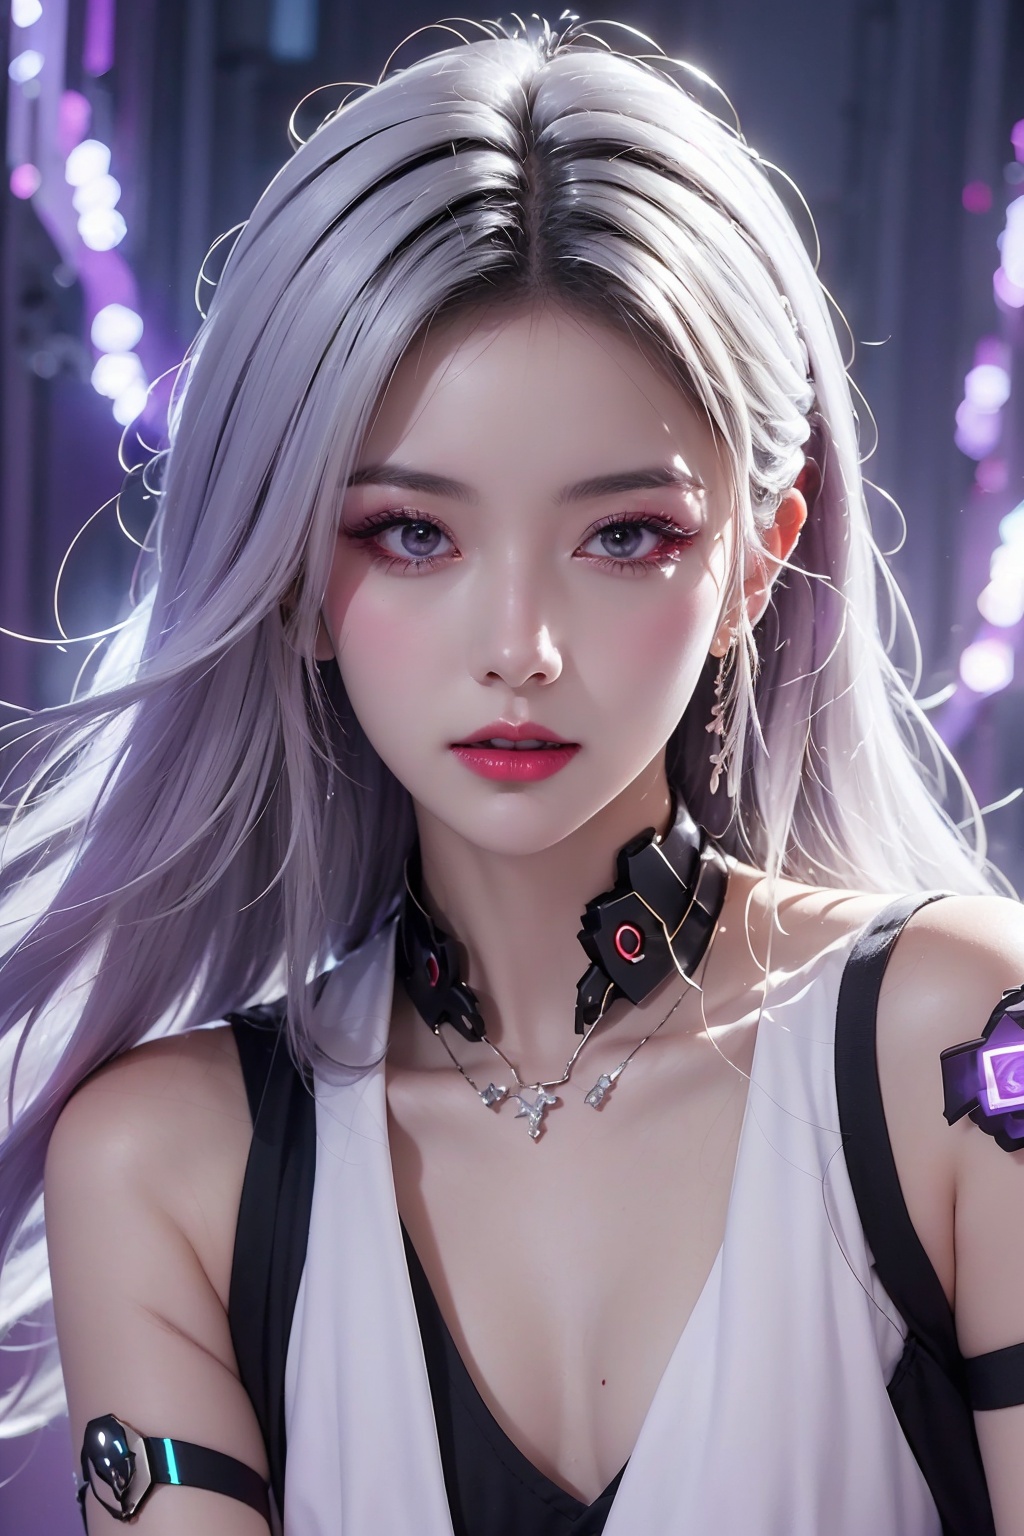  best quality, 8k, concept art, Thought-Provoking Aunt of Blood, intricate details, JoJo pose, Straps, Rings, Gloves, Low shutter, (Violet power aura:1.2), most beautiful artwork in the world, White hair,aesthetics, atmosphere, (neon,cyborg:1.1), fantasy, depth of field